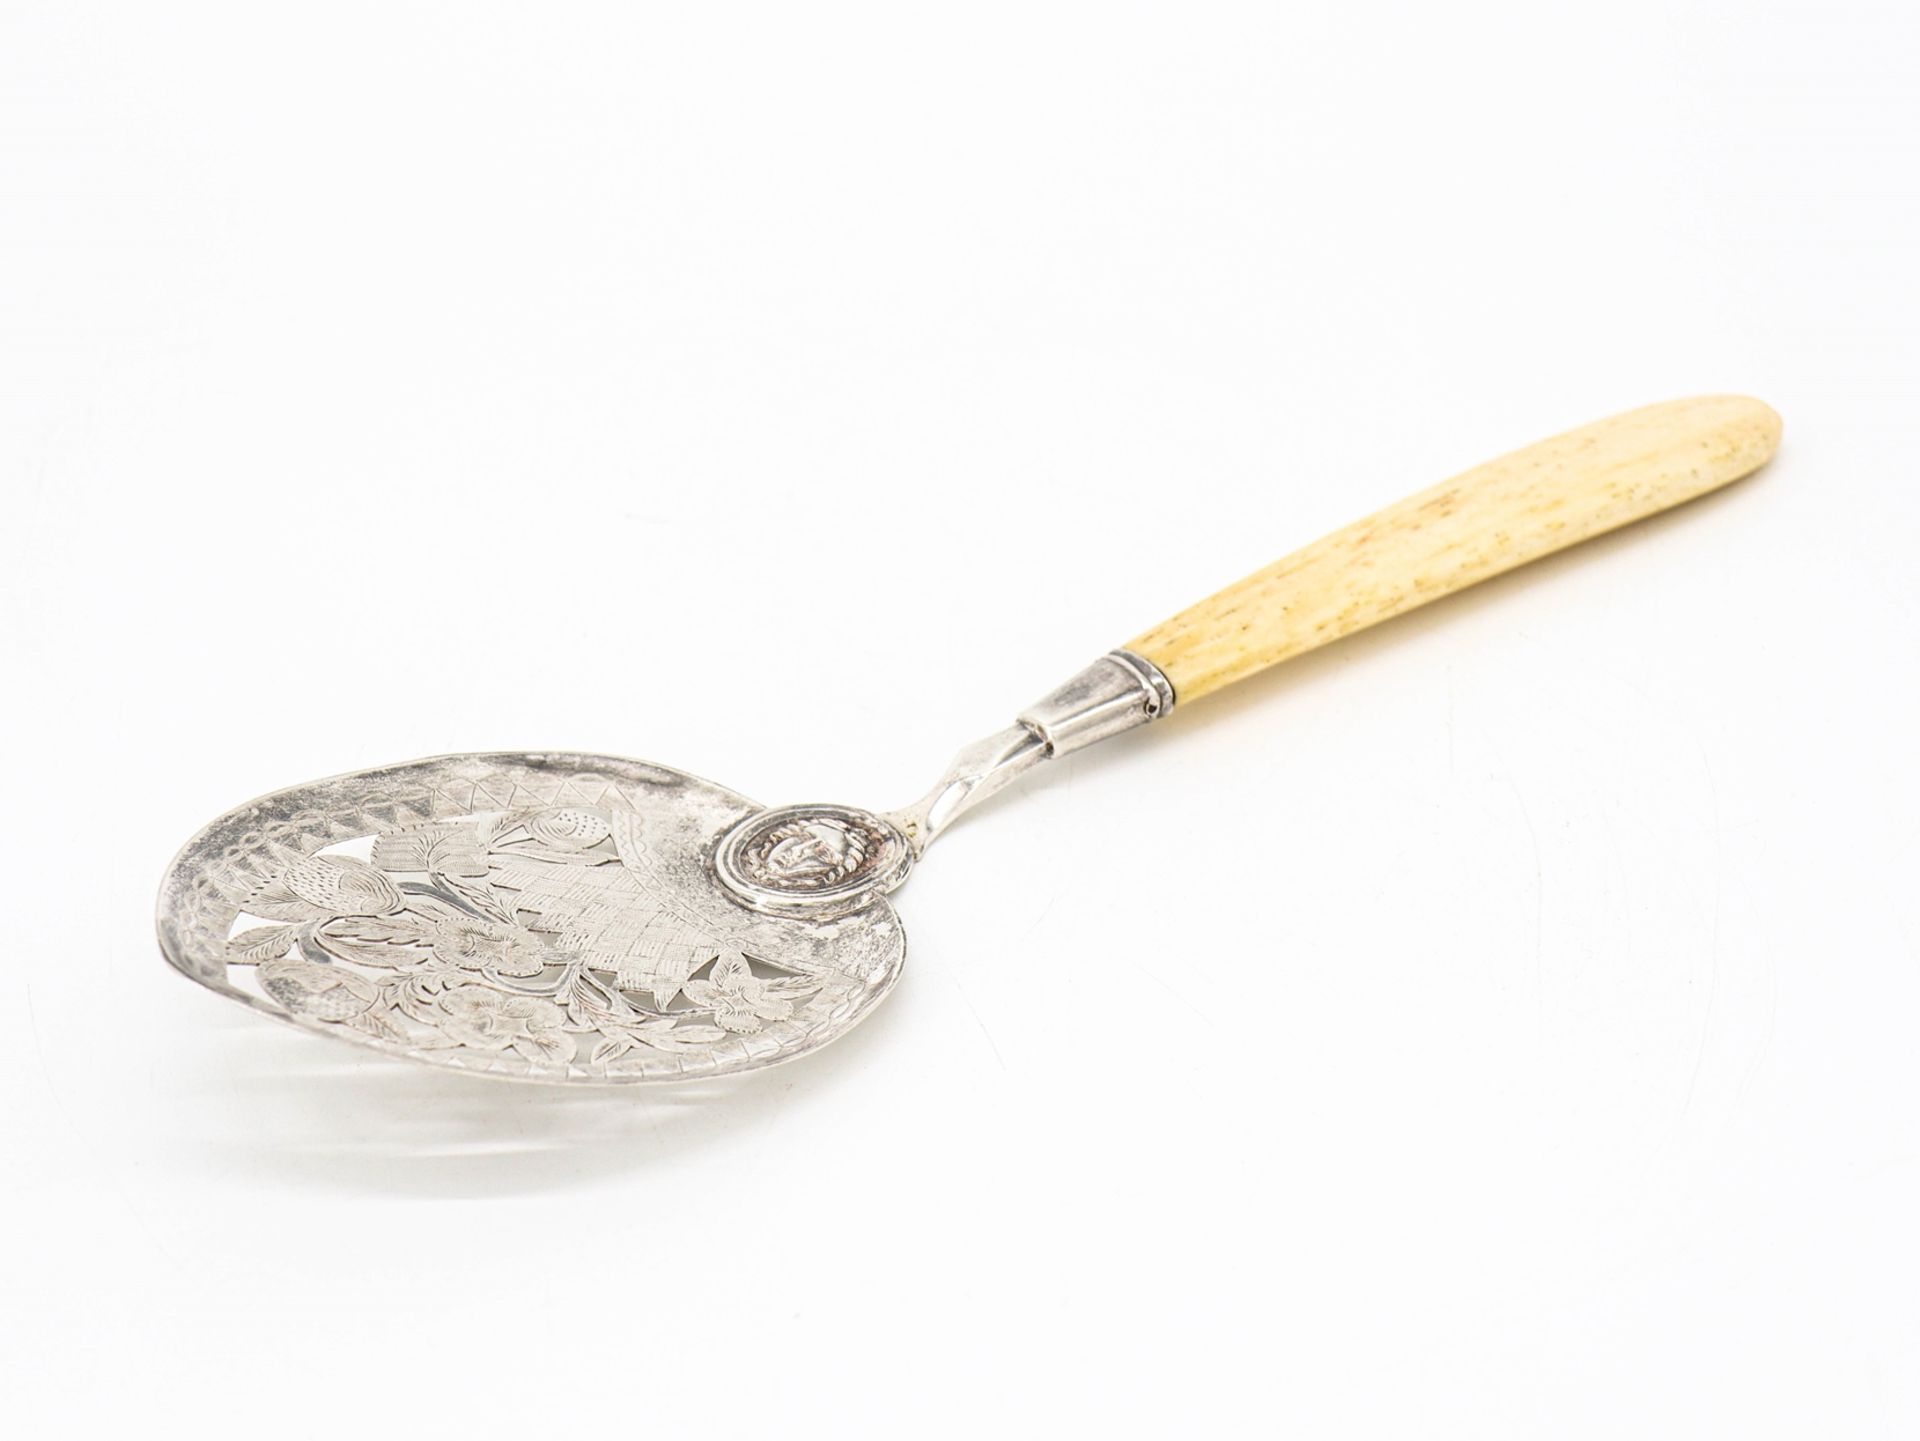 Pâté server with leg handle, chased silver, finest chasing, around 1800 - Image 3 of 7